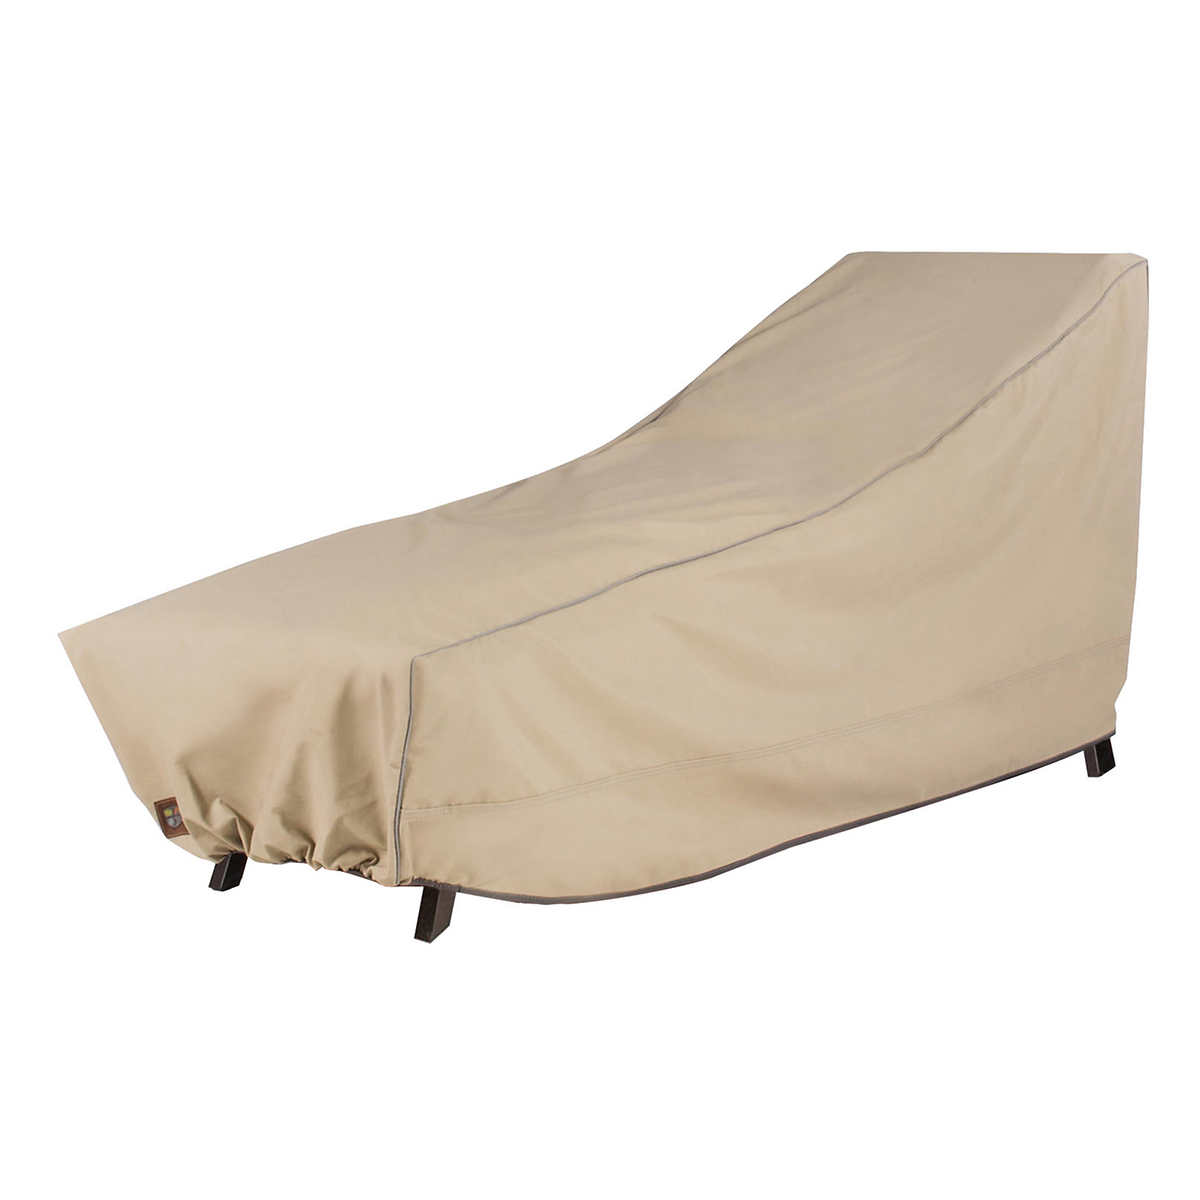 Outdoor Patio Chair Cover Chaise Costco, Outdoor Patio Chair Covers Waterproof